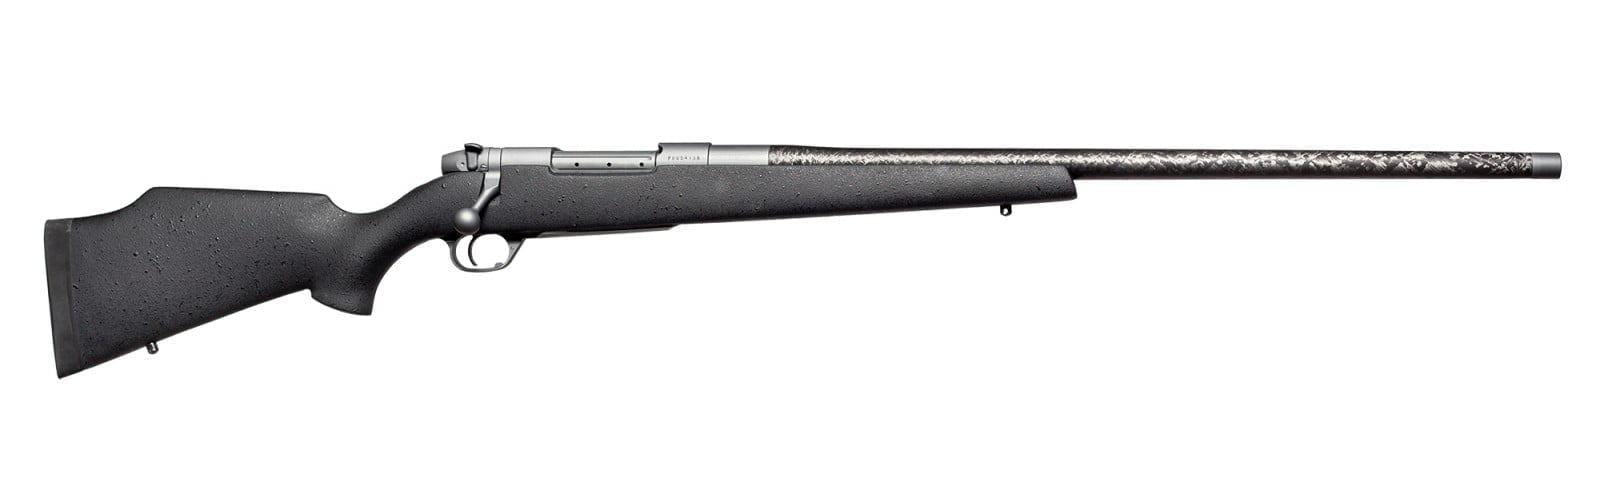 Weatherby V CarbonMark. An elegant hunting rifle with a lightweight carbon-fiber sleeve on a stainless steel barrel. It's all weight saving.